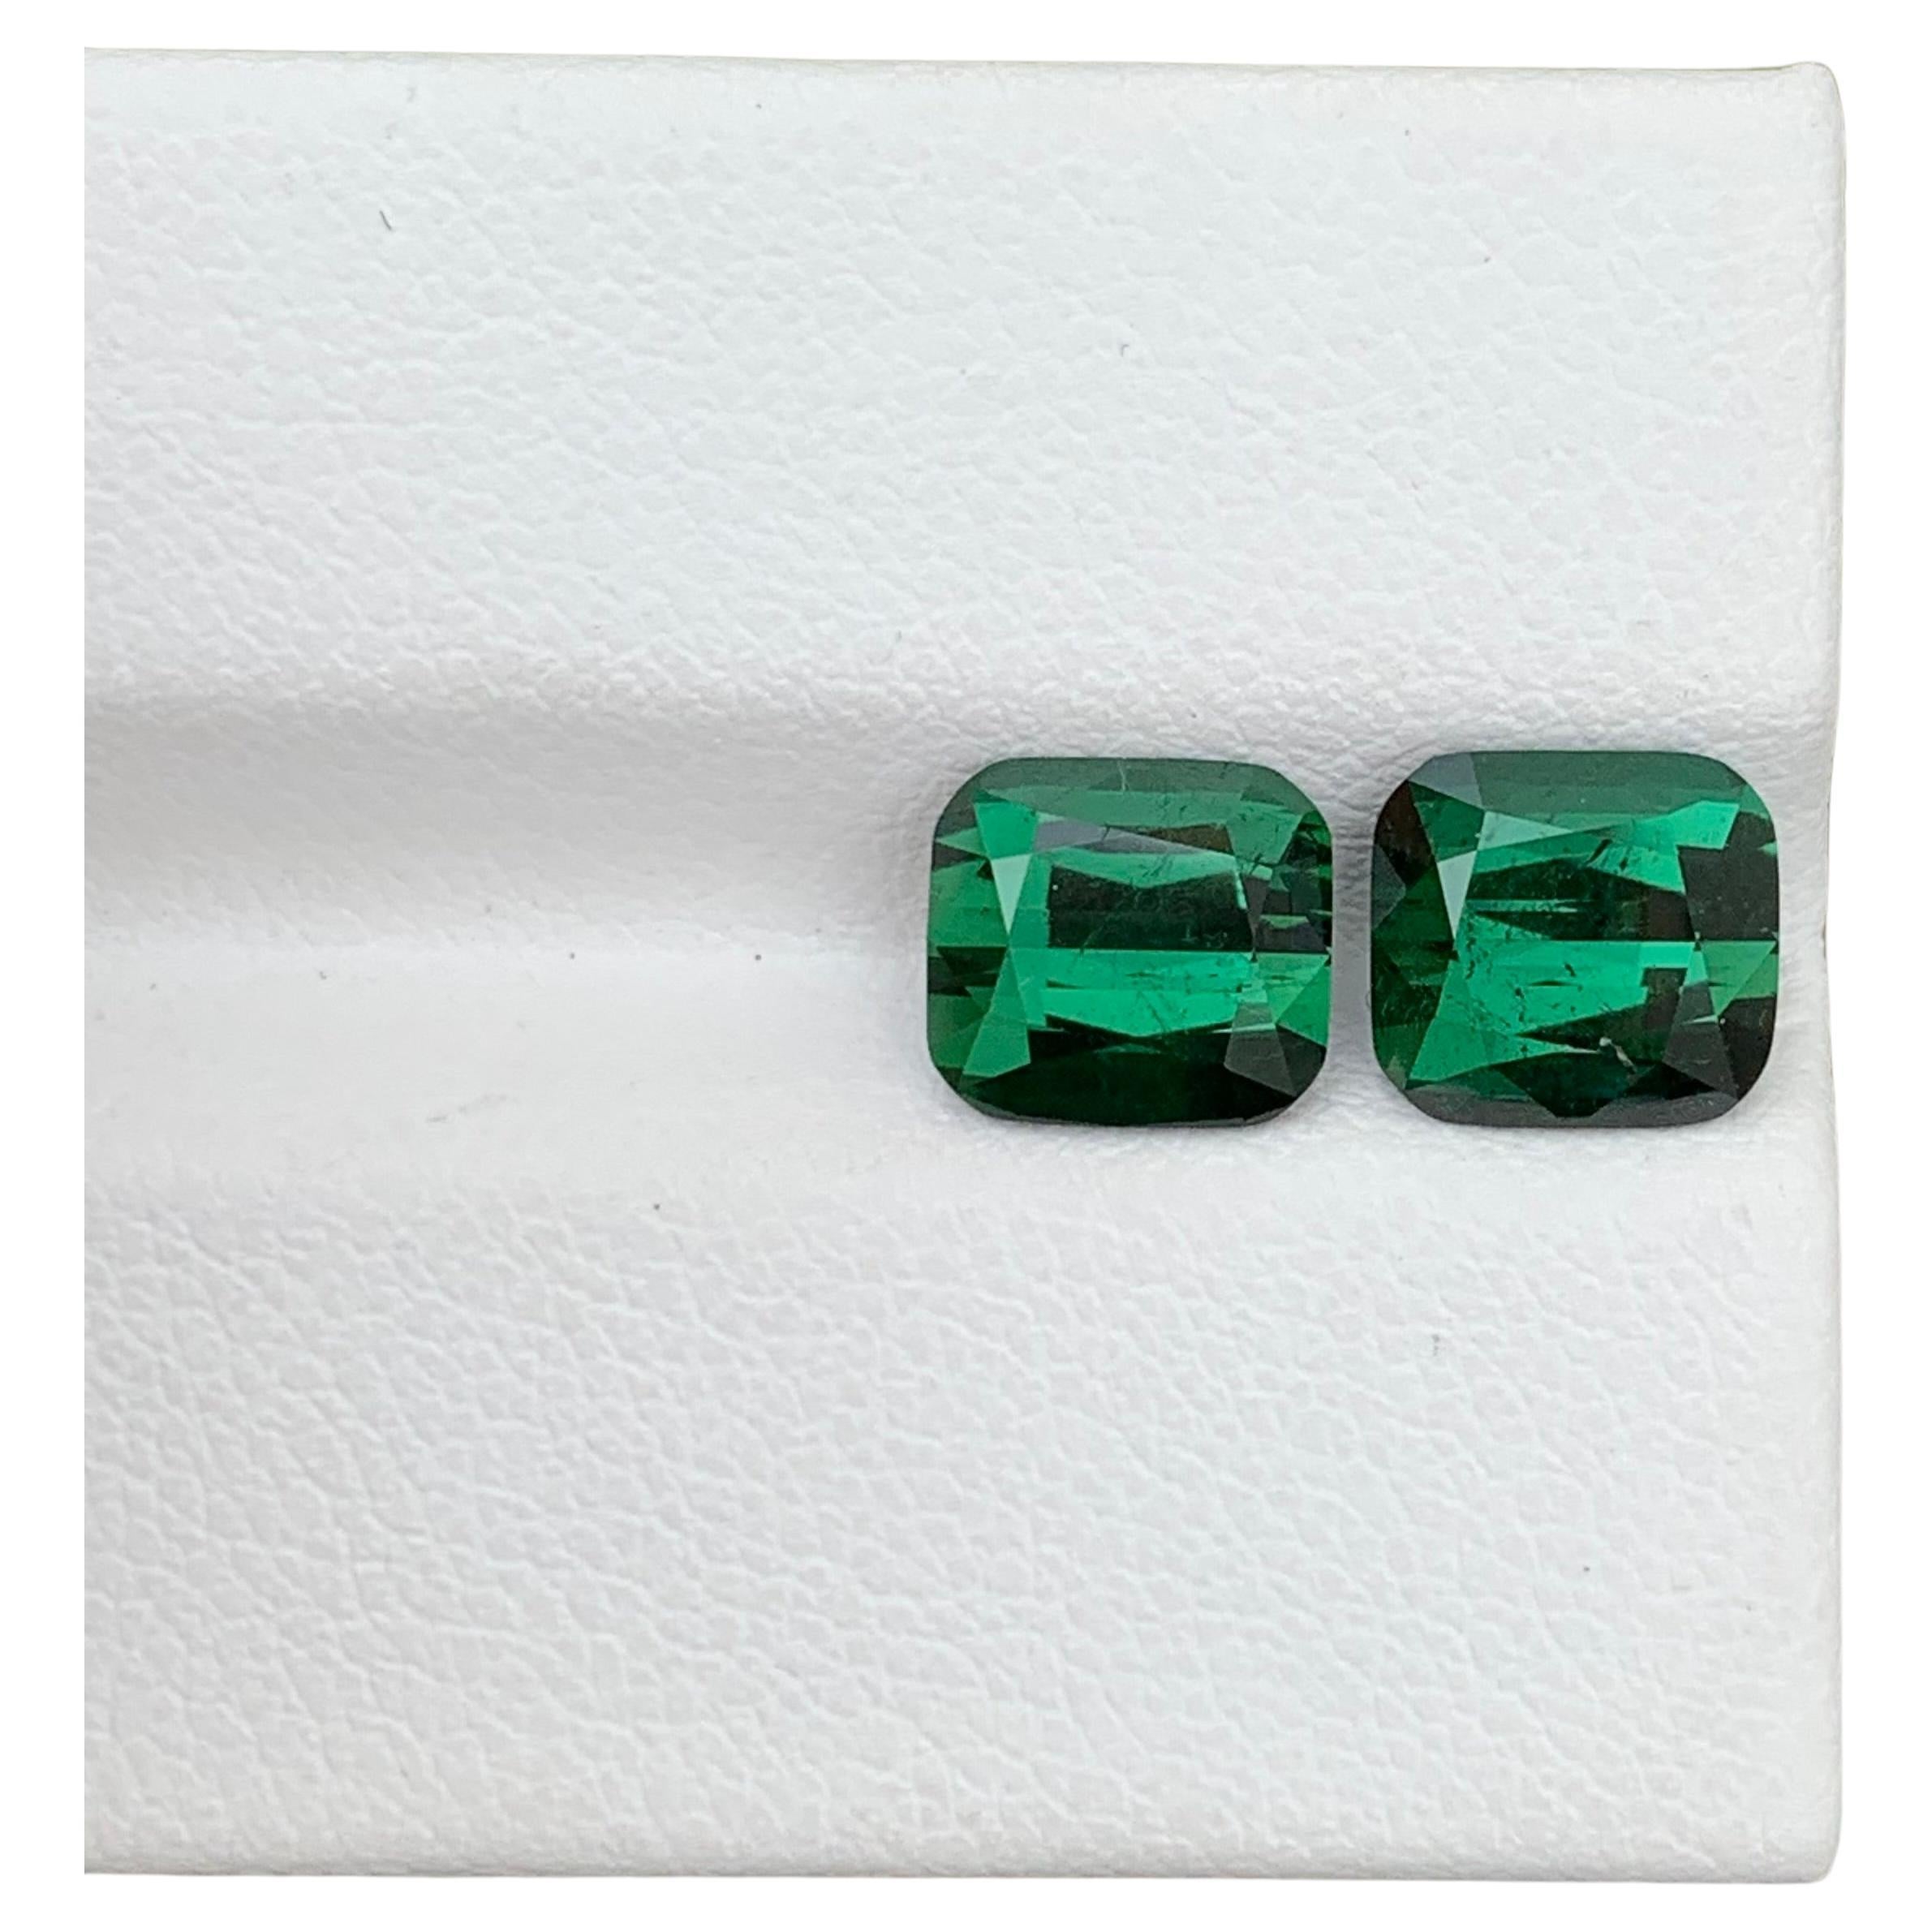 Loose Green Tourmaline
Weight: 4.50 Carats 
             2.15 And 2.35 Carat 
Dimension: 7.6 x 7 x 5 Mm And 7.1 x 7.7 x 5 Mm 
Colour: Green
Origin: Afghanistan
Certificate: On Demand
Treatment: Non

Tourmaline is a captivating gemstone known for its